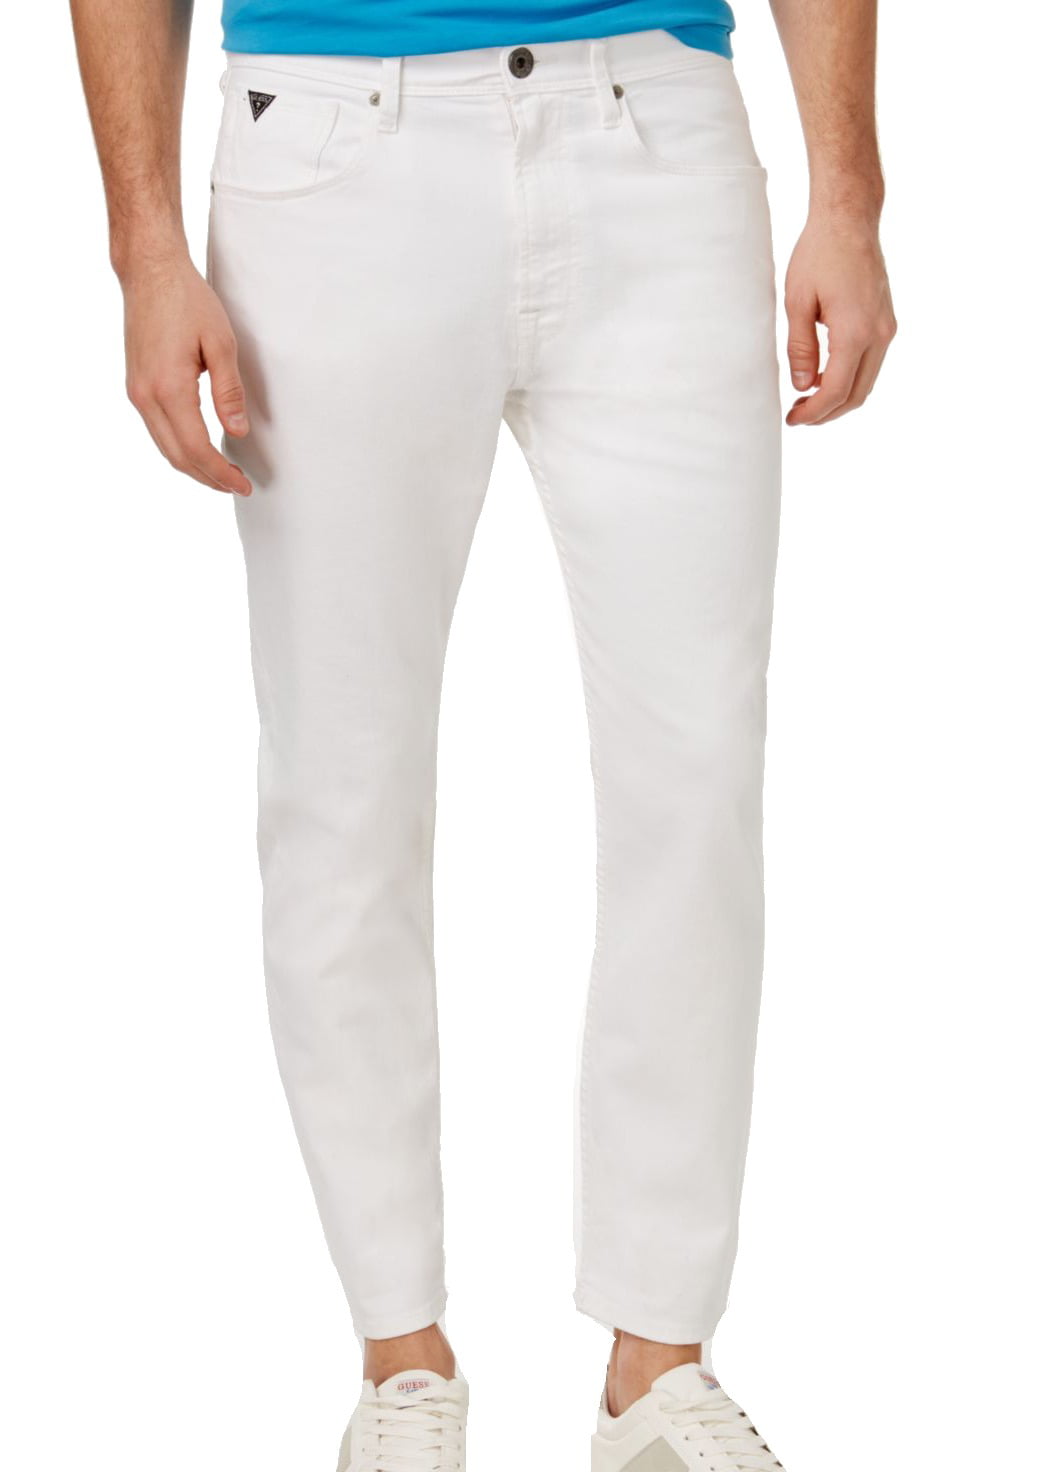 GUESS - Guess NEW White Mens Size 36x27 Tapered Relaxed Cropped Denim ...